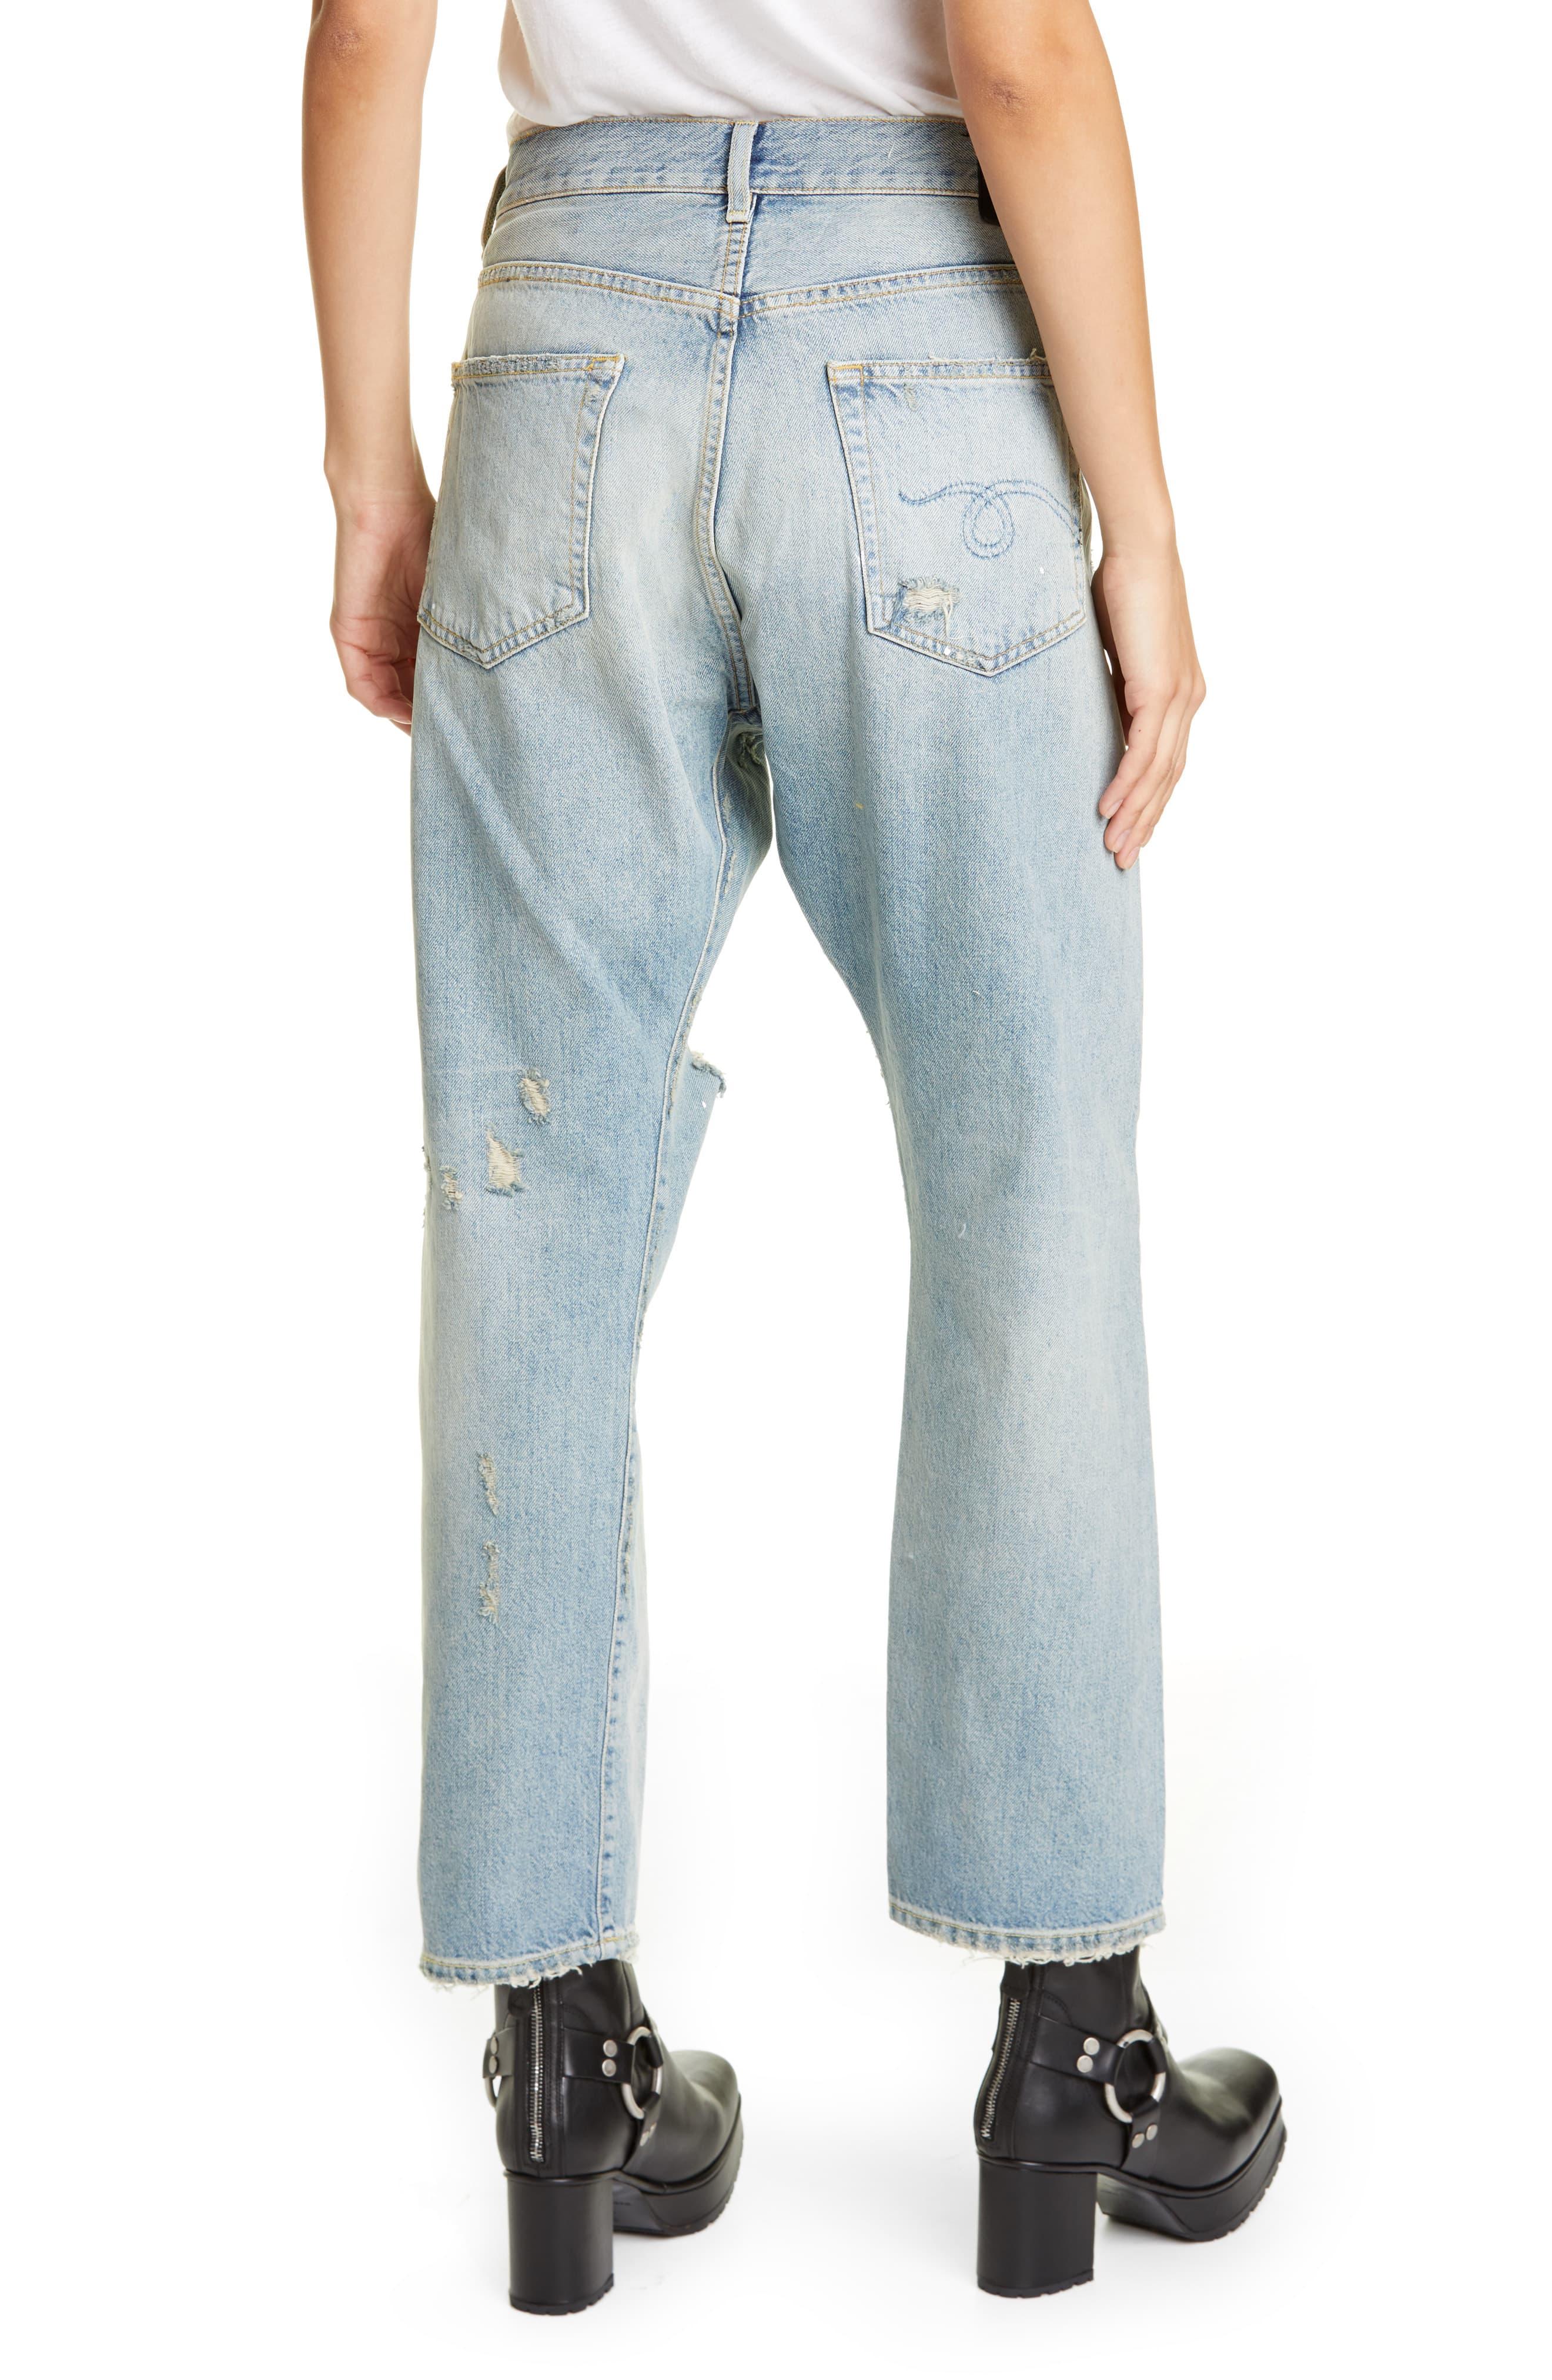 R13 Denim Crossover Ripped Jeans in Blue - Lyst